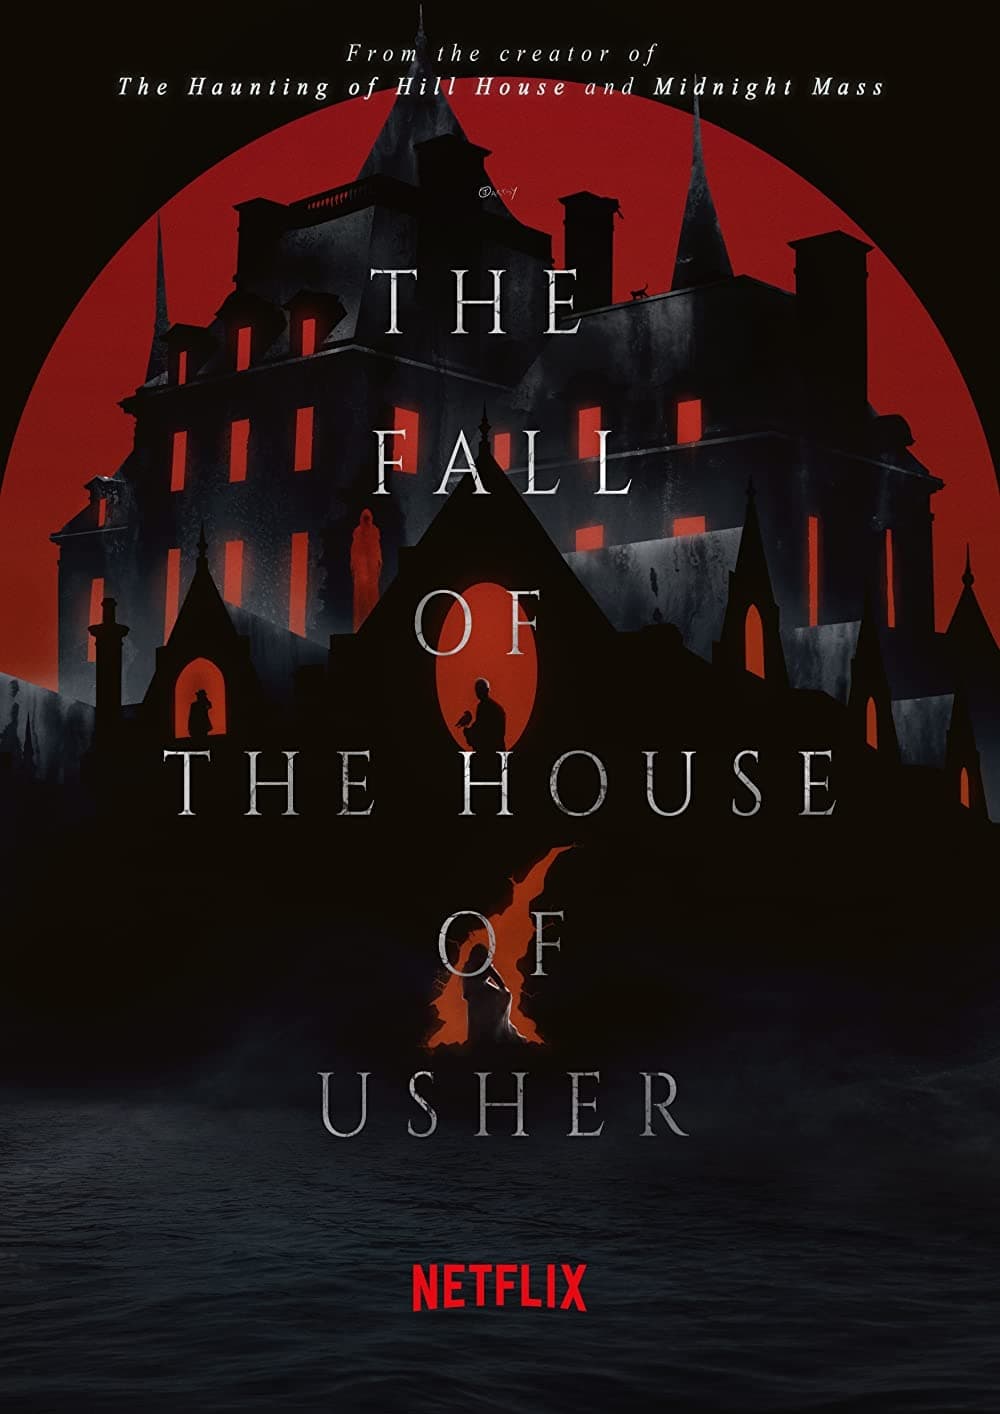 The Fall of the House of Usher TV Shows About Based On Short Story